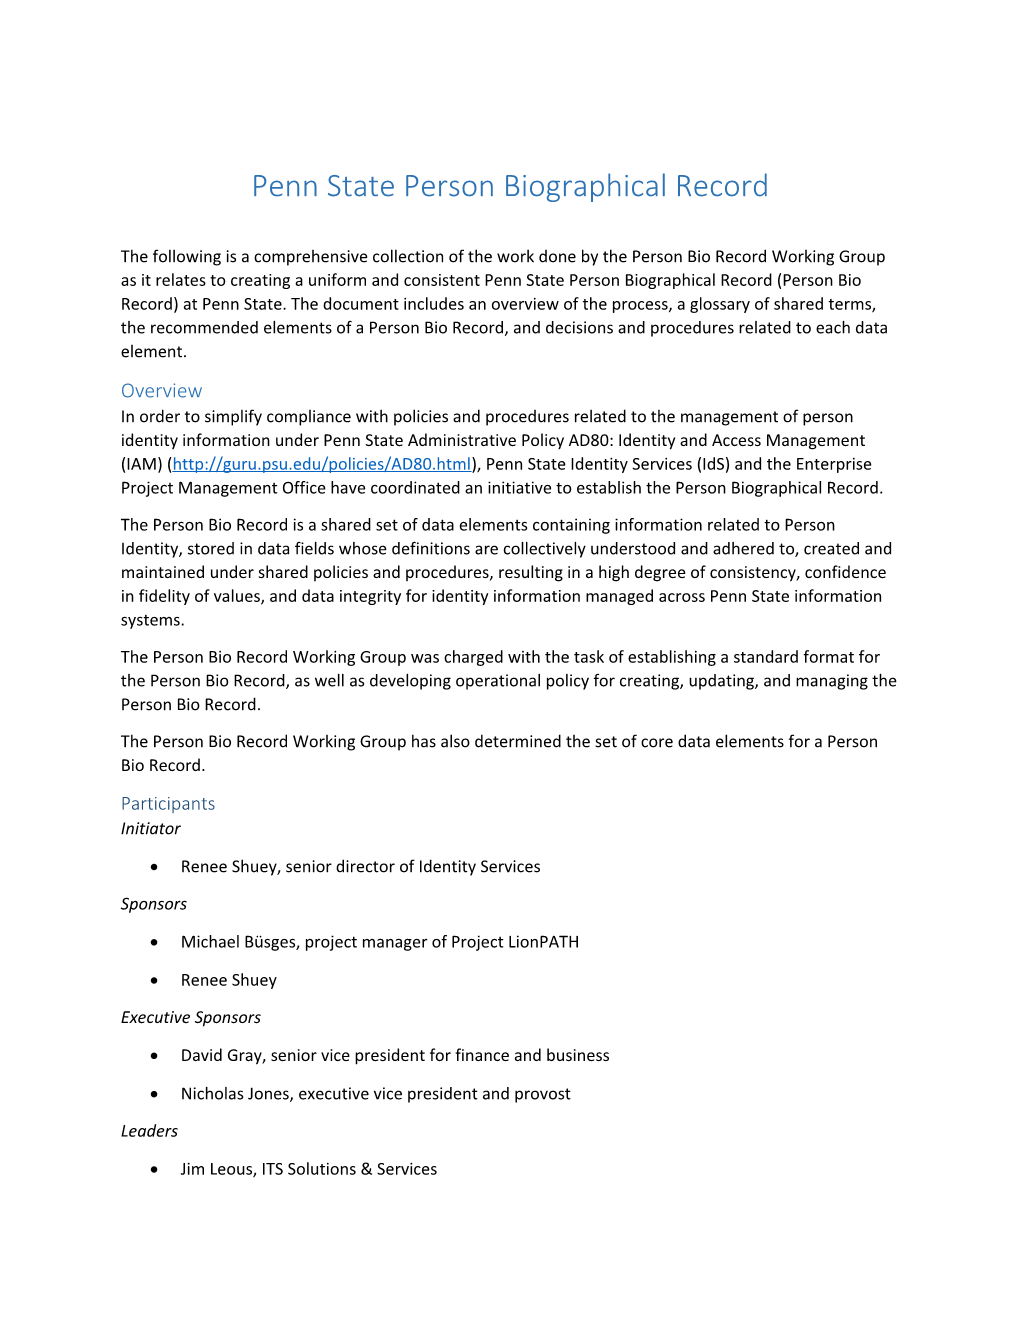 Penn State Person Biographical Record